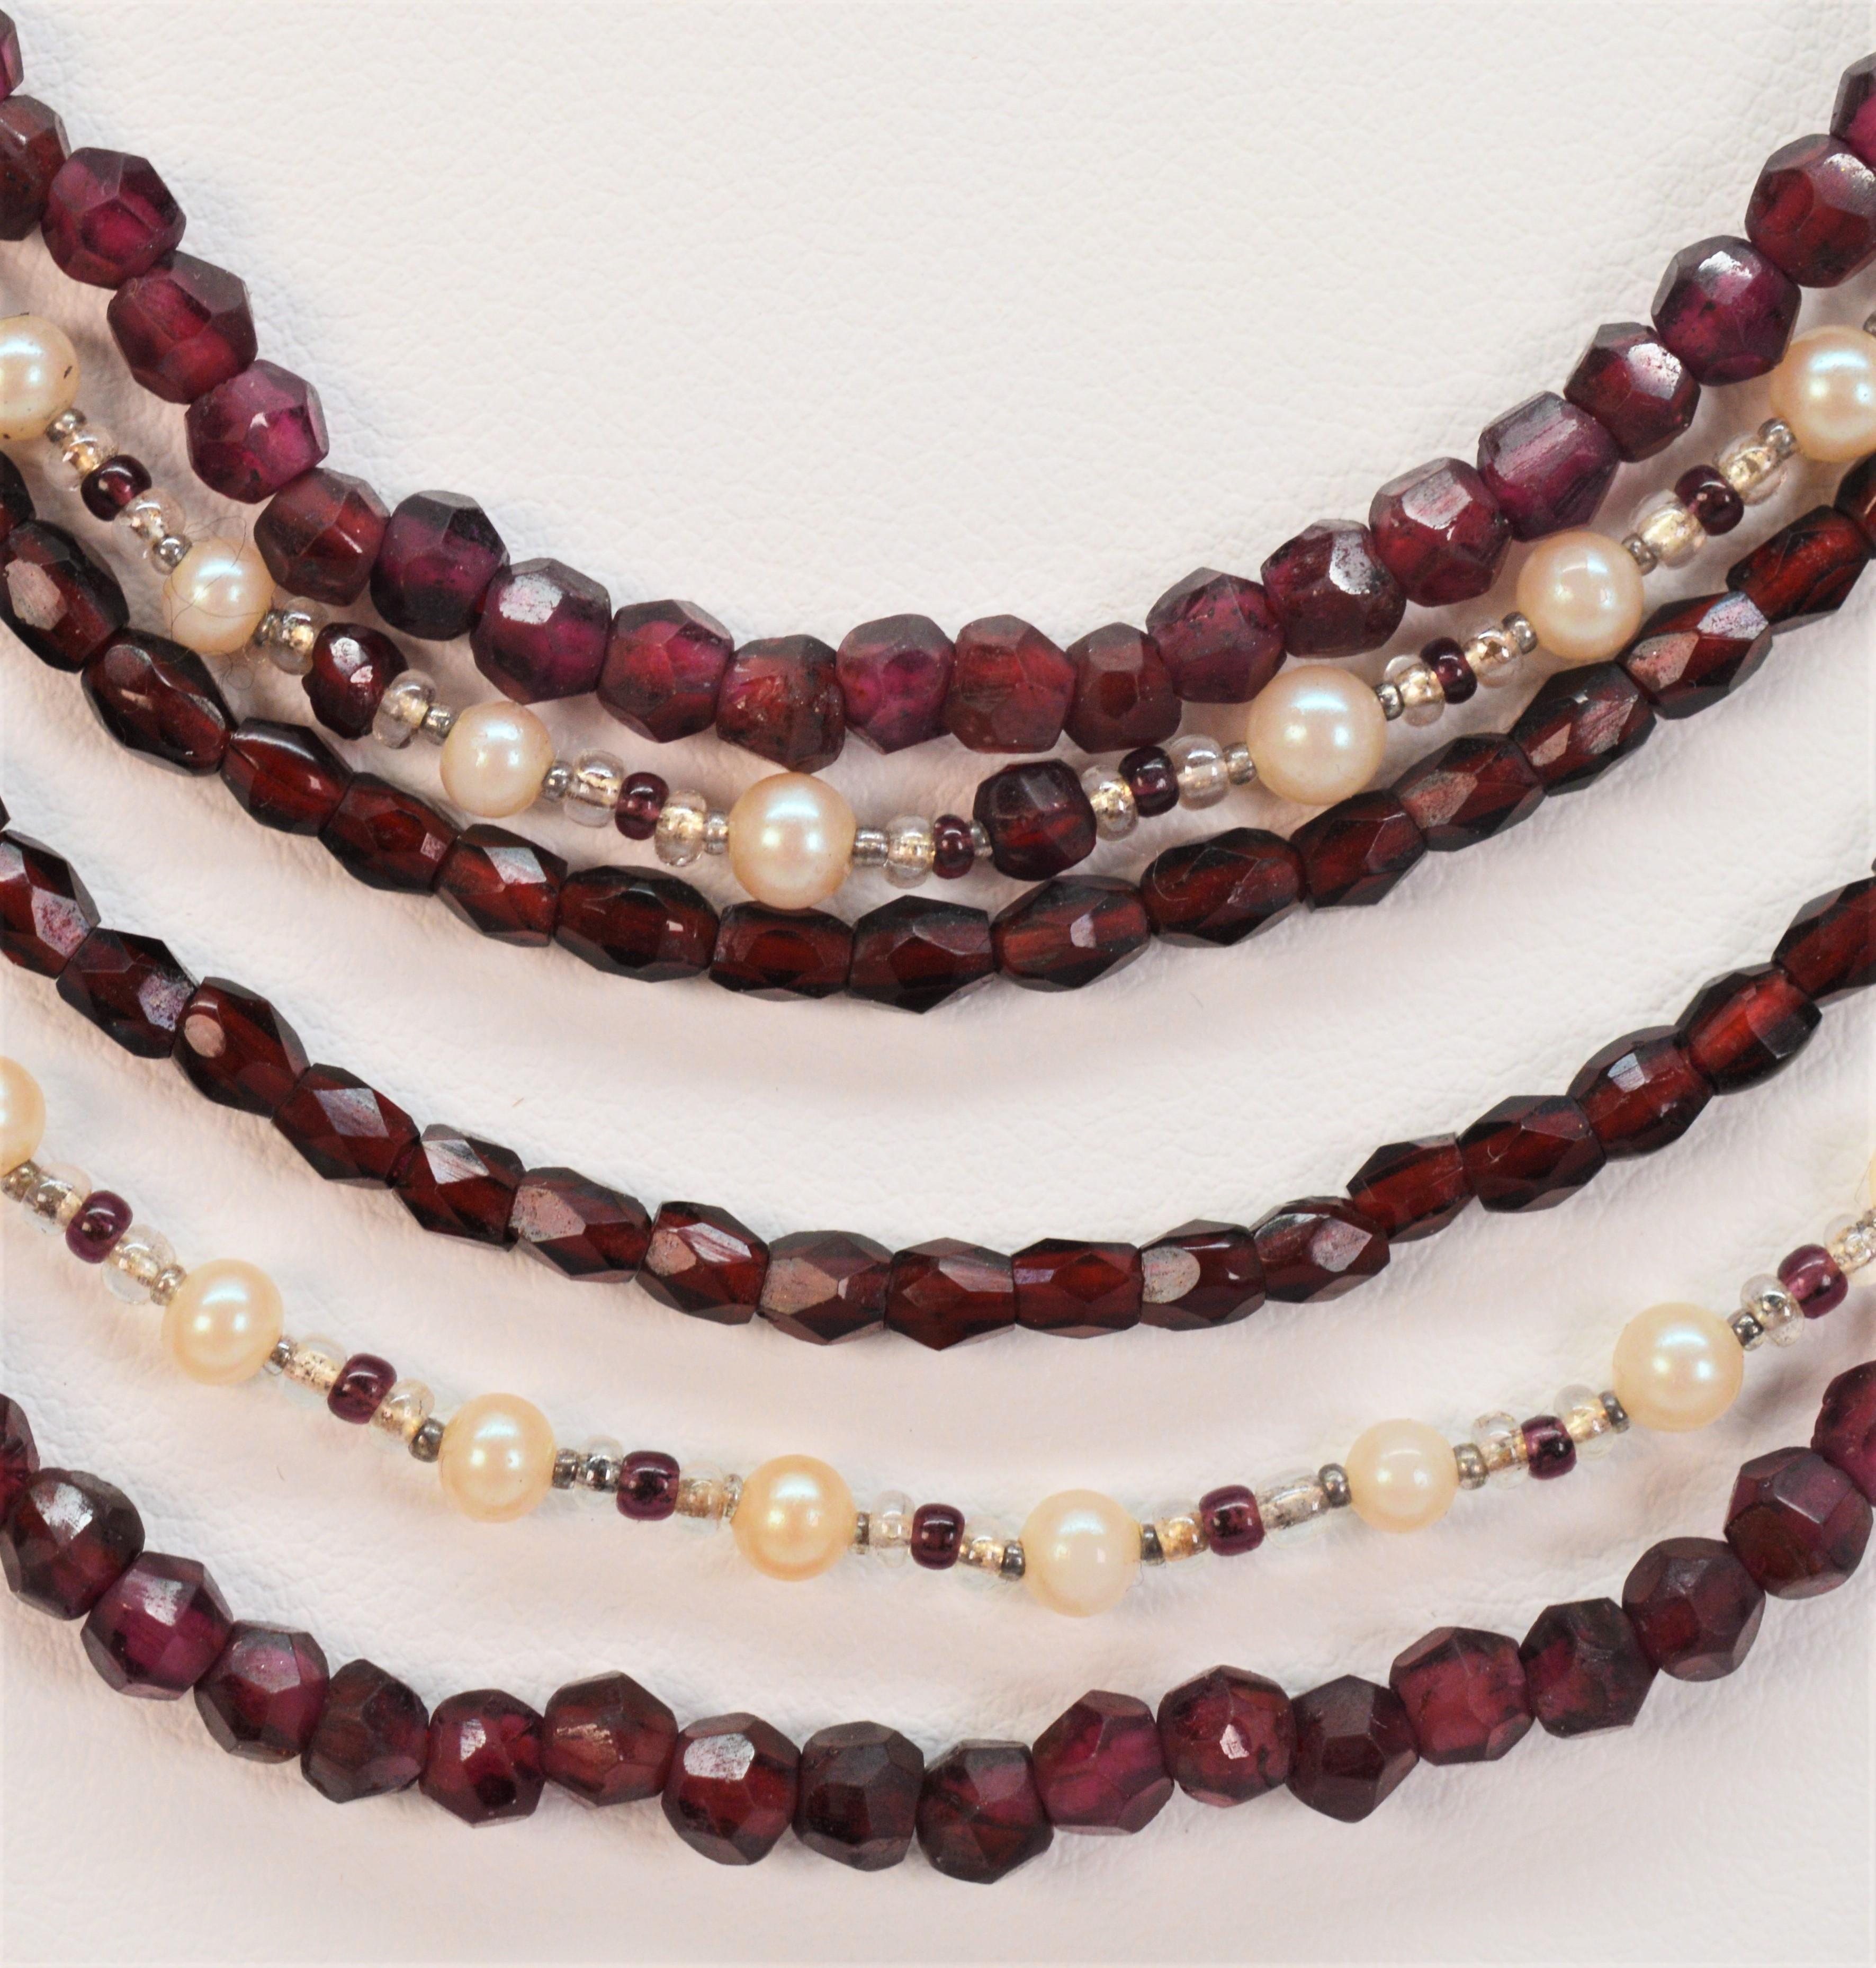 Mixed Cut Garnet Pearl Multi Strand Necklace with Fancy Antique Jeweled Yellow Gold Clasp